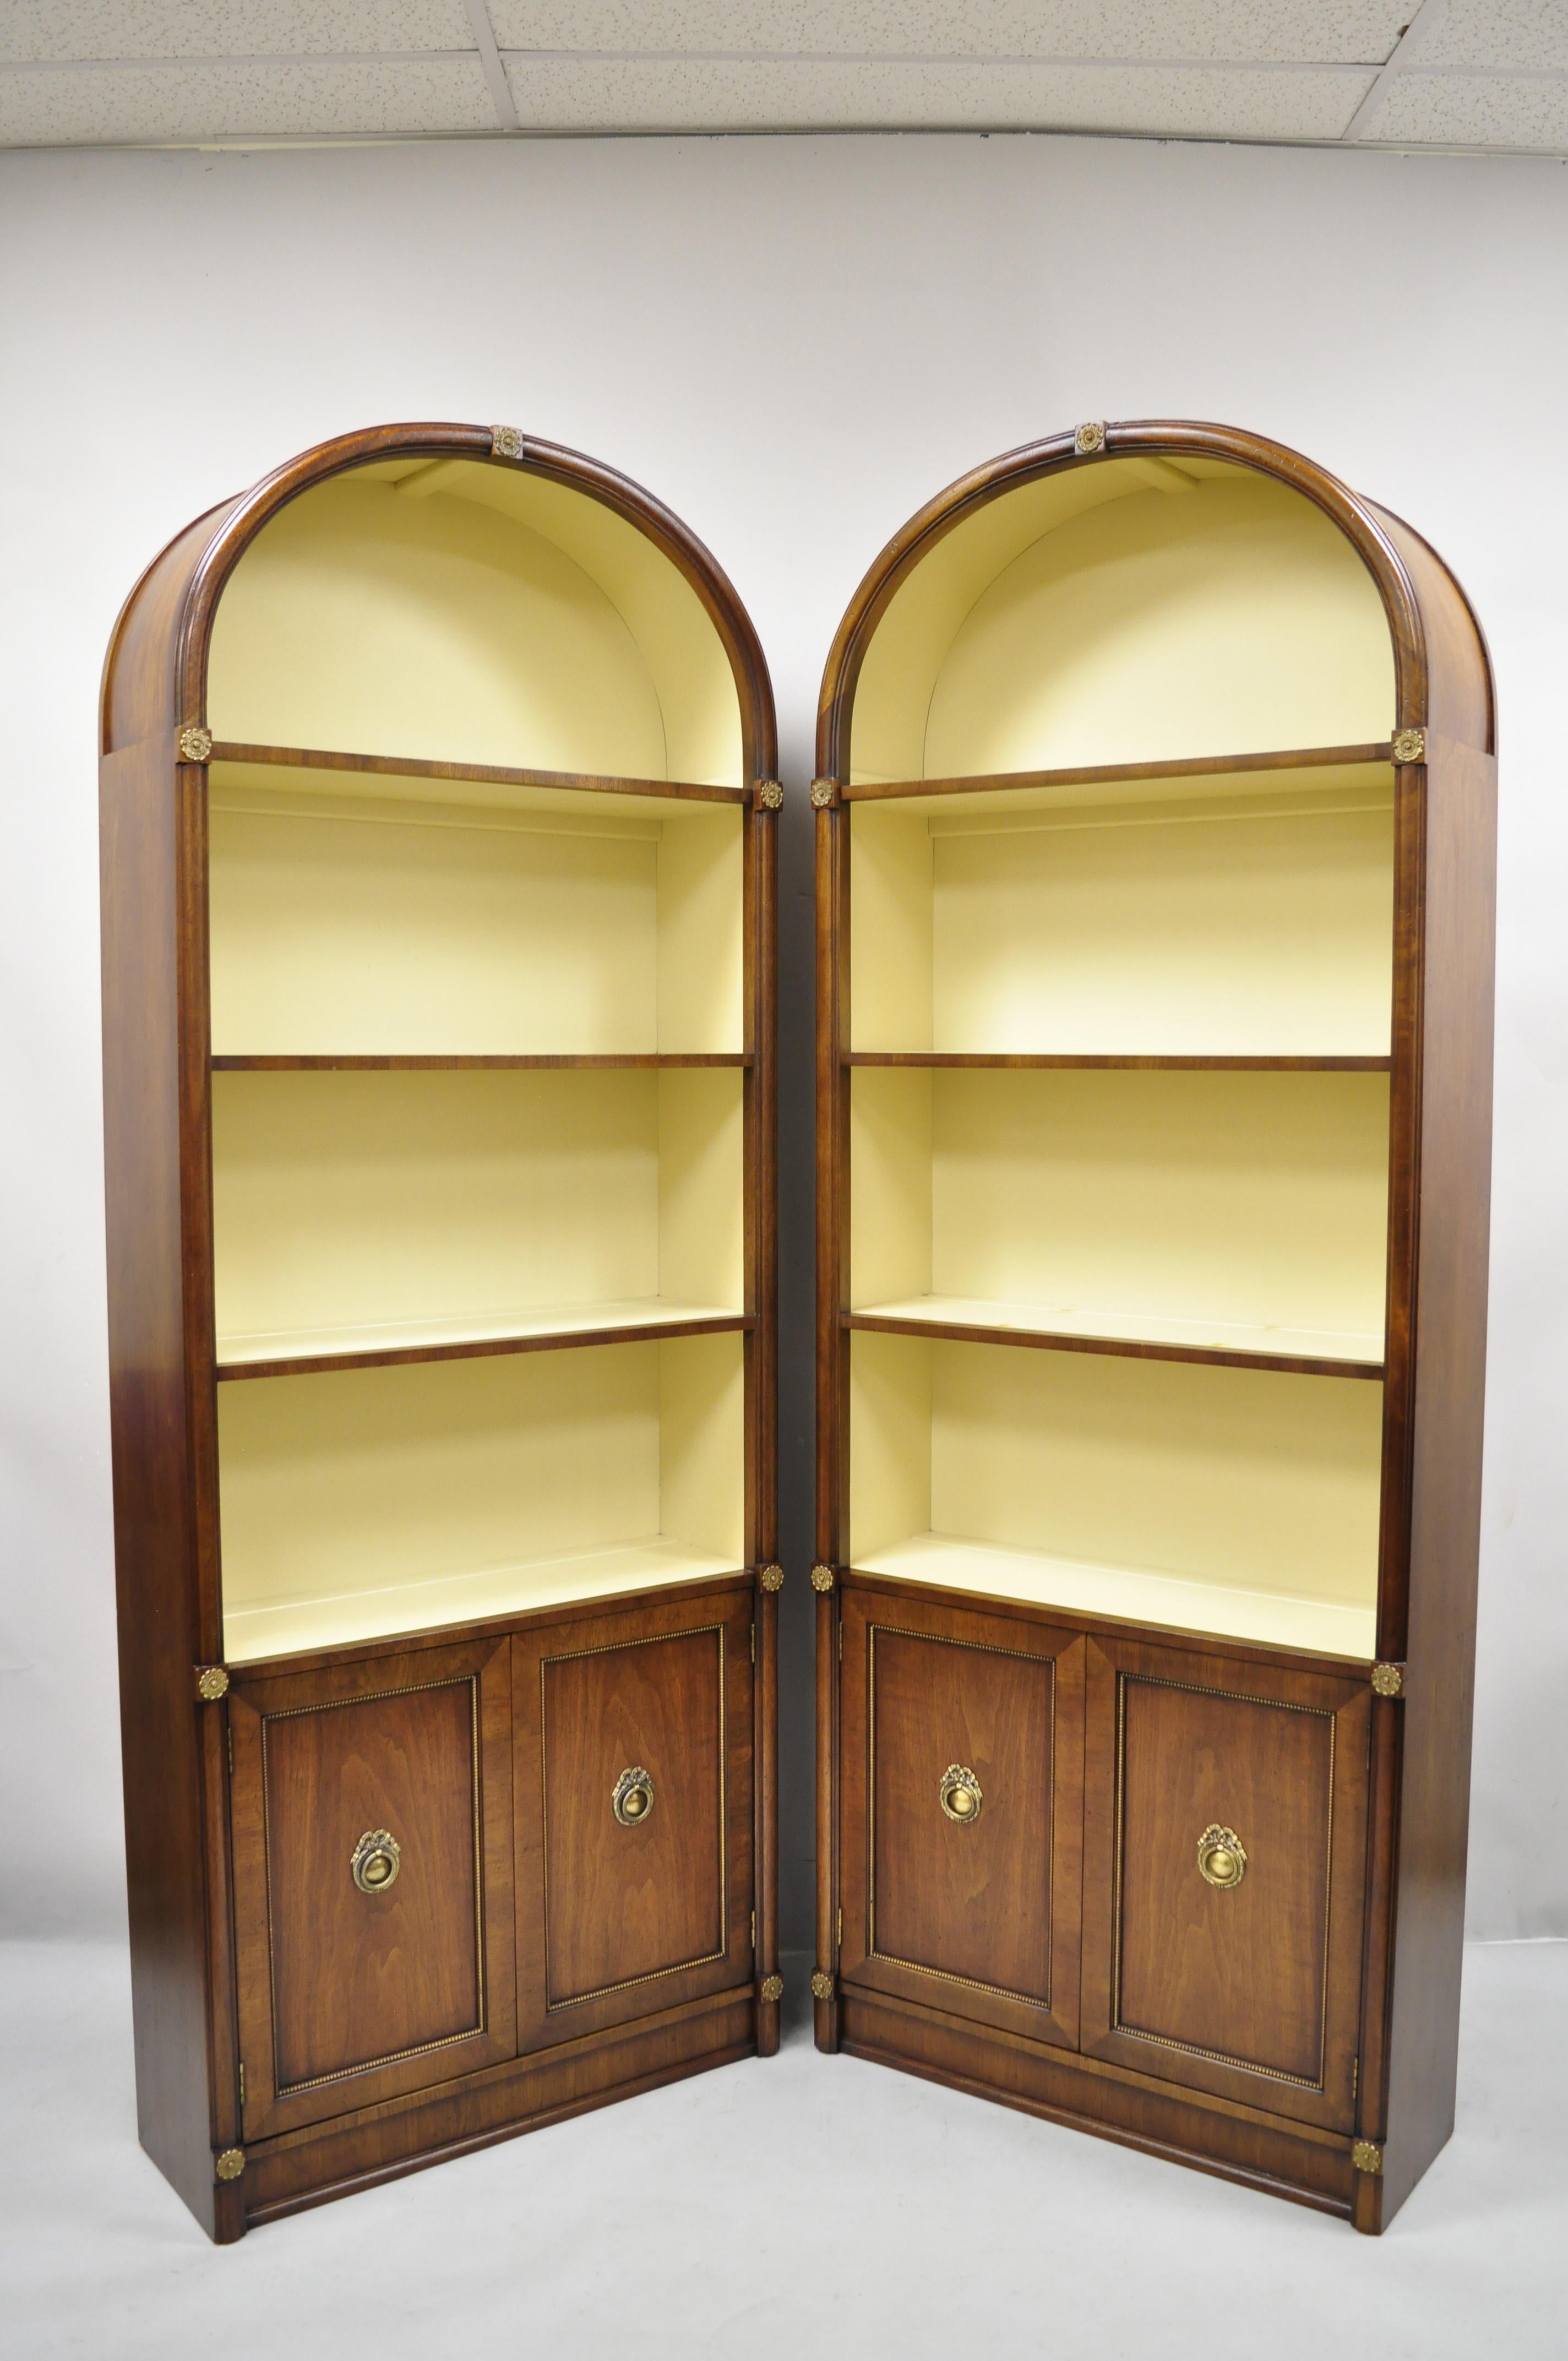 French Empire Hollywood Regency tall arched dome walnut etagere Curio cabinets - a pair. Item features tall arched dome tops, beautiful wood grain, 2 swing doors, 3 wooden shelves, solid brass hardware, quality American craftsmanship, great style